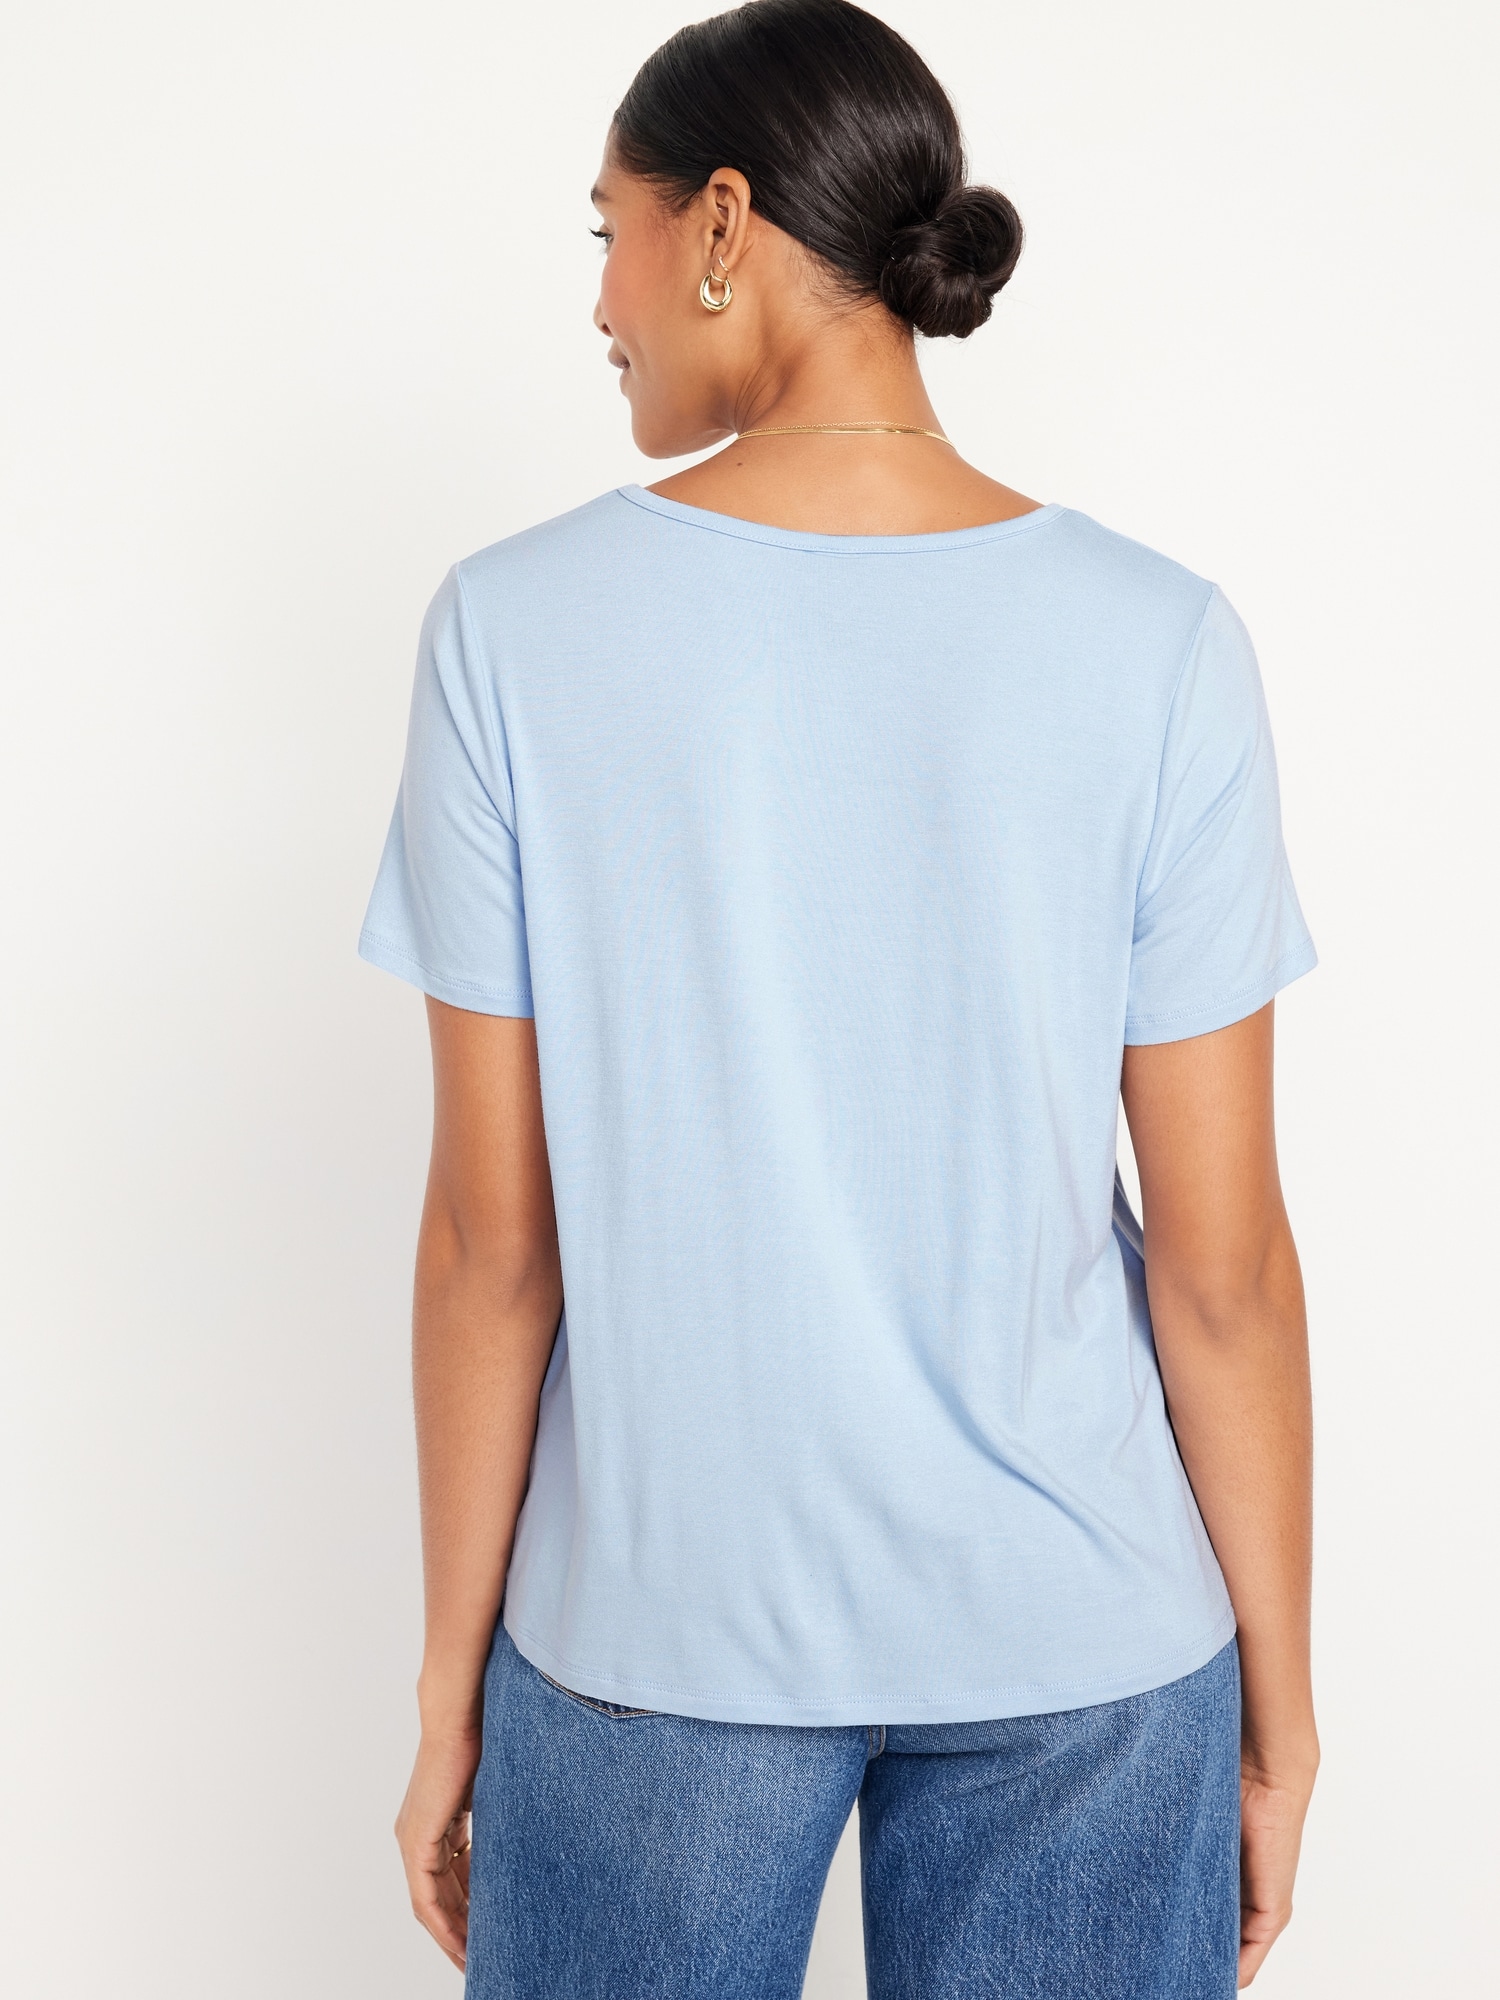 Luxe V-Neck T-Shirt | Old Navy